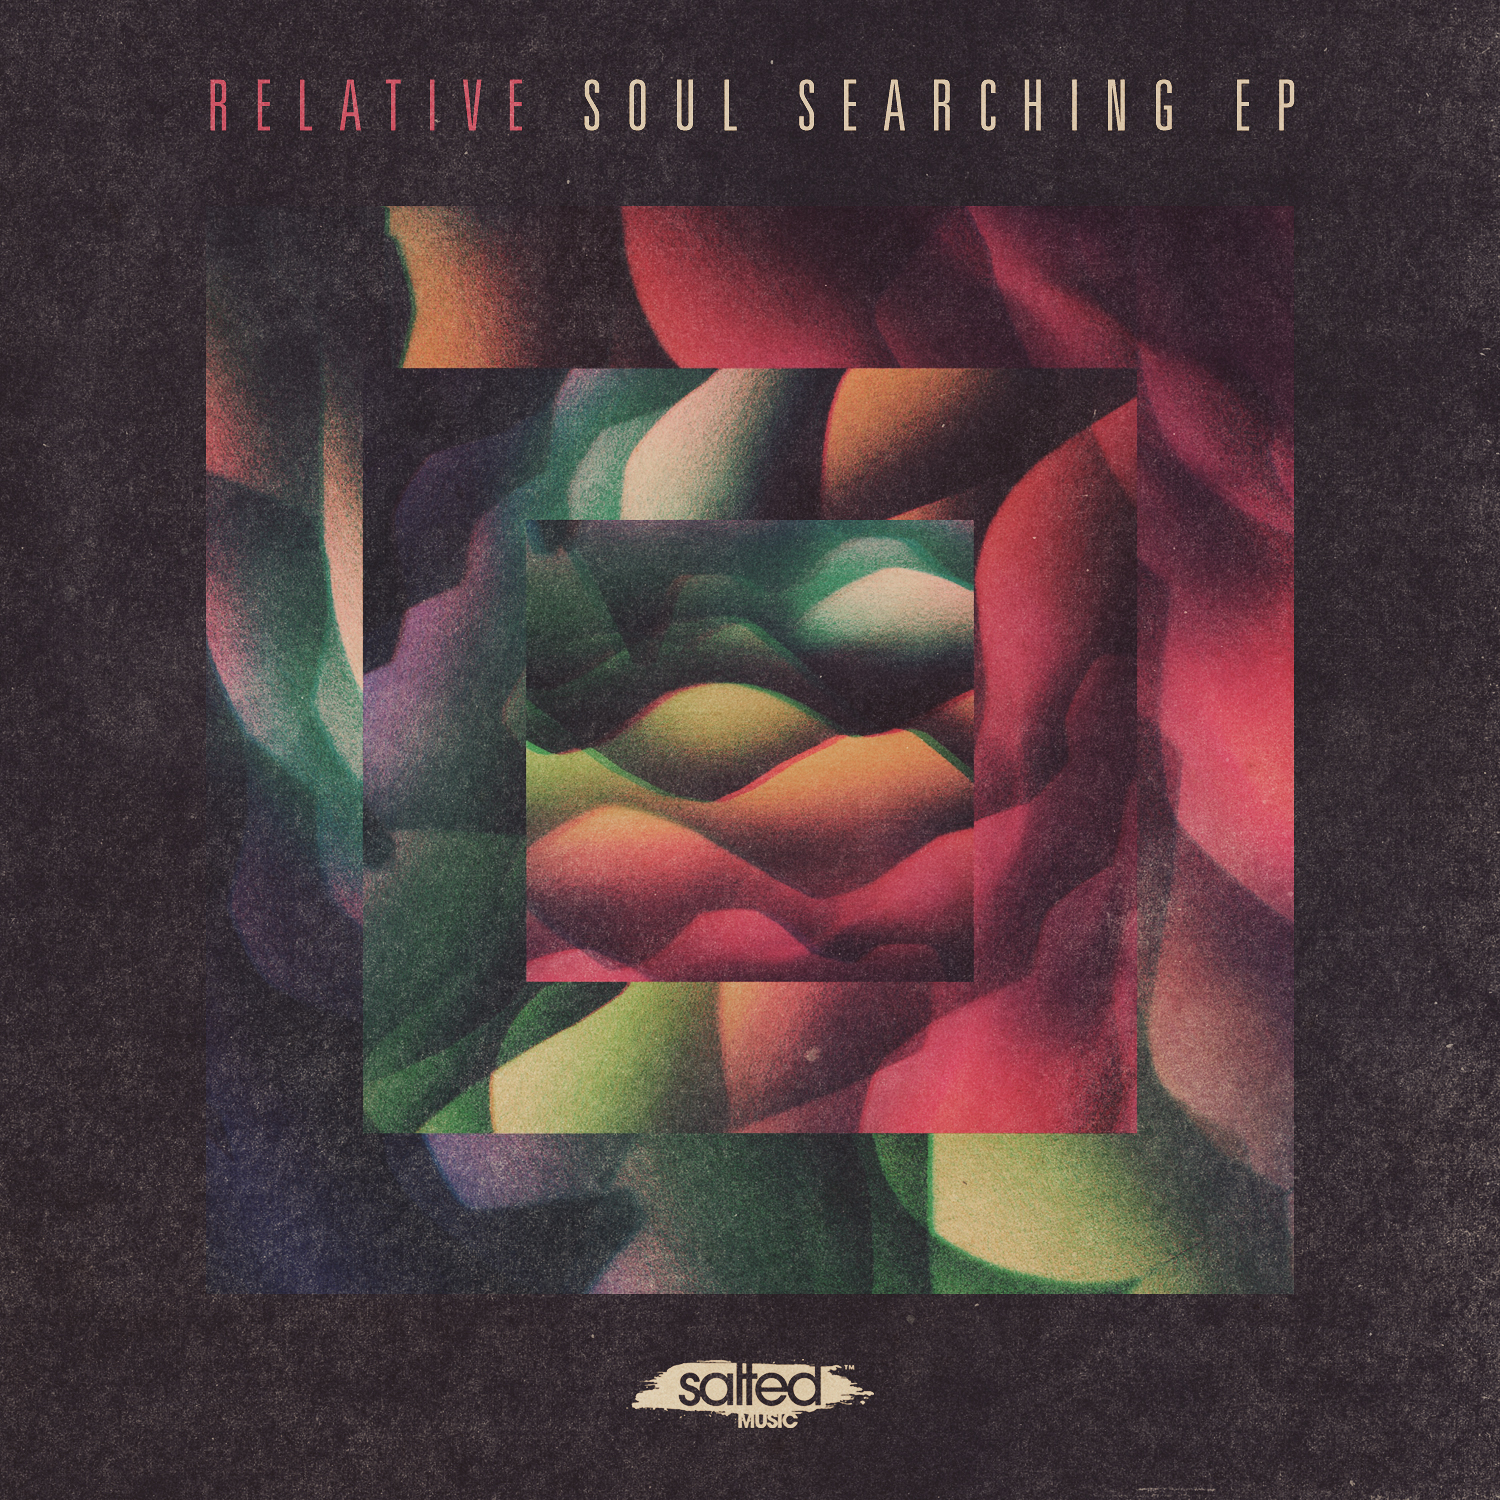 SLT092 Soul Searching EP - Relative (Salted Music)